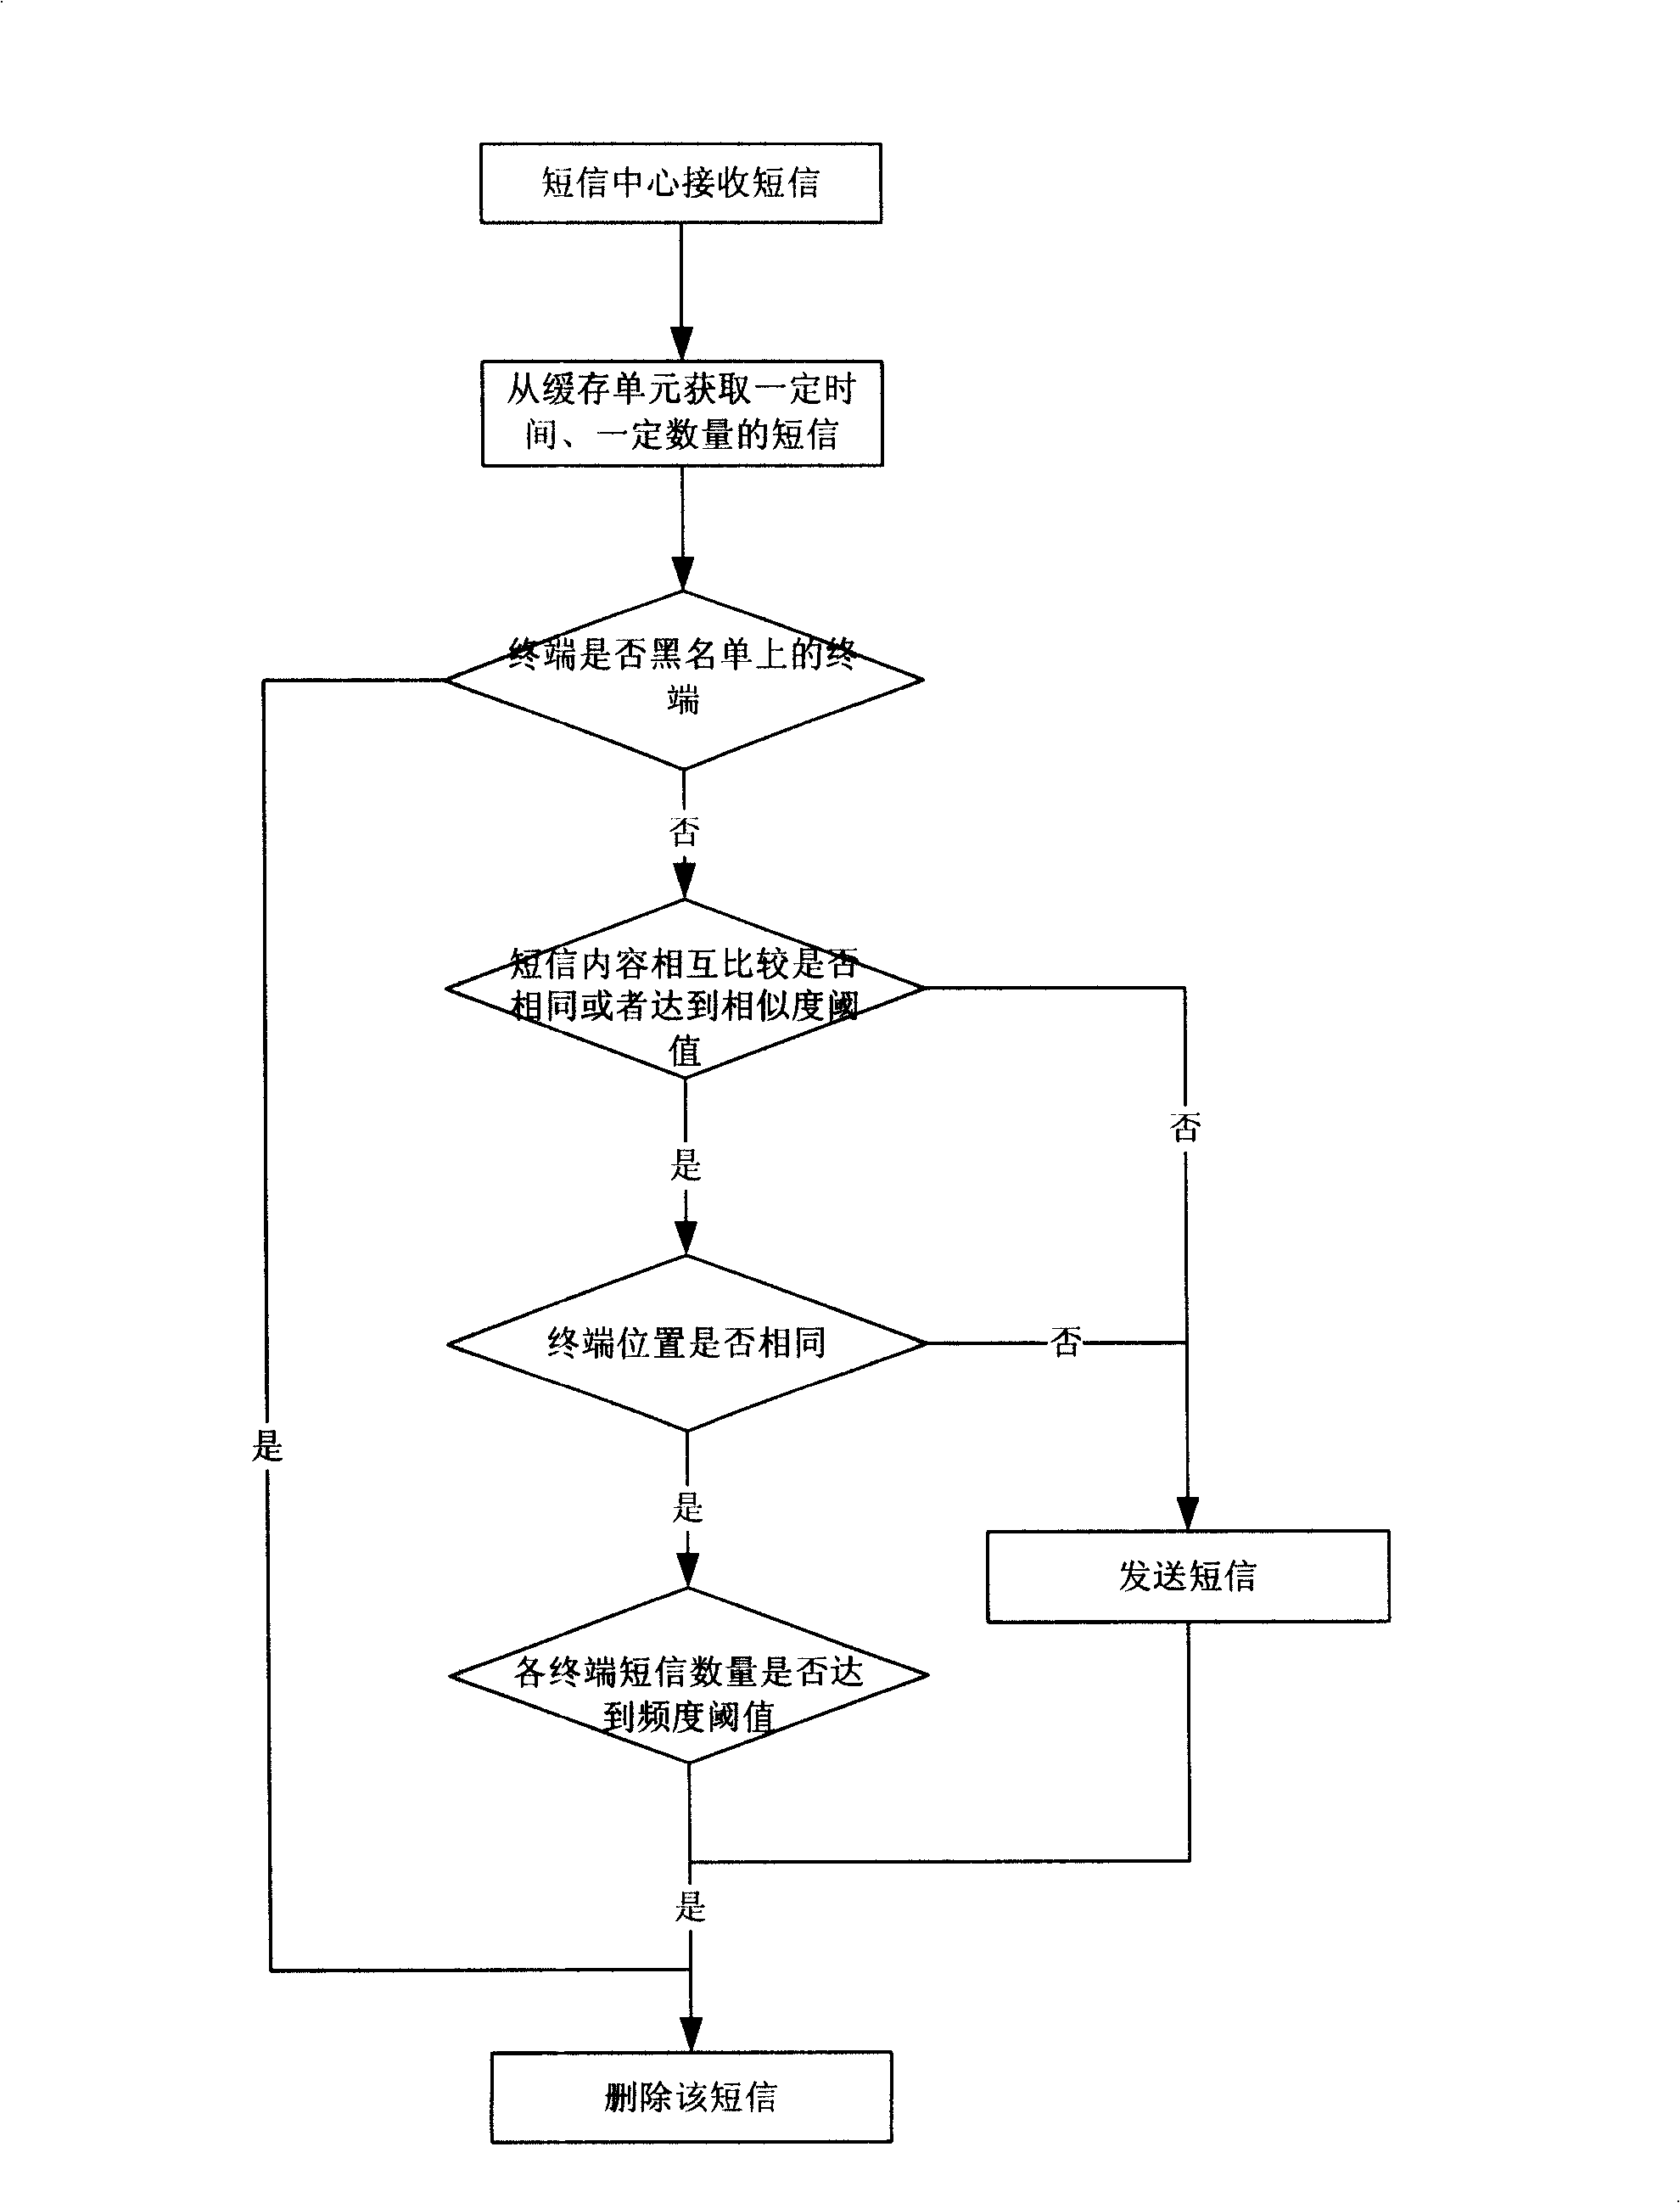 Method and equipment for shielding rubbish short message